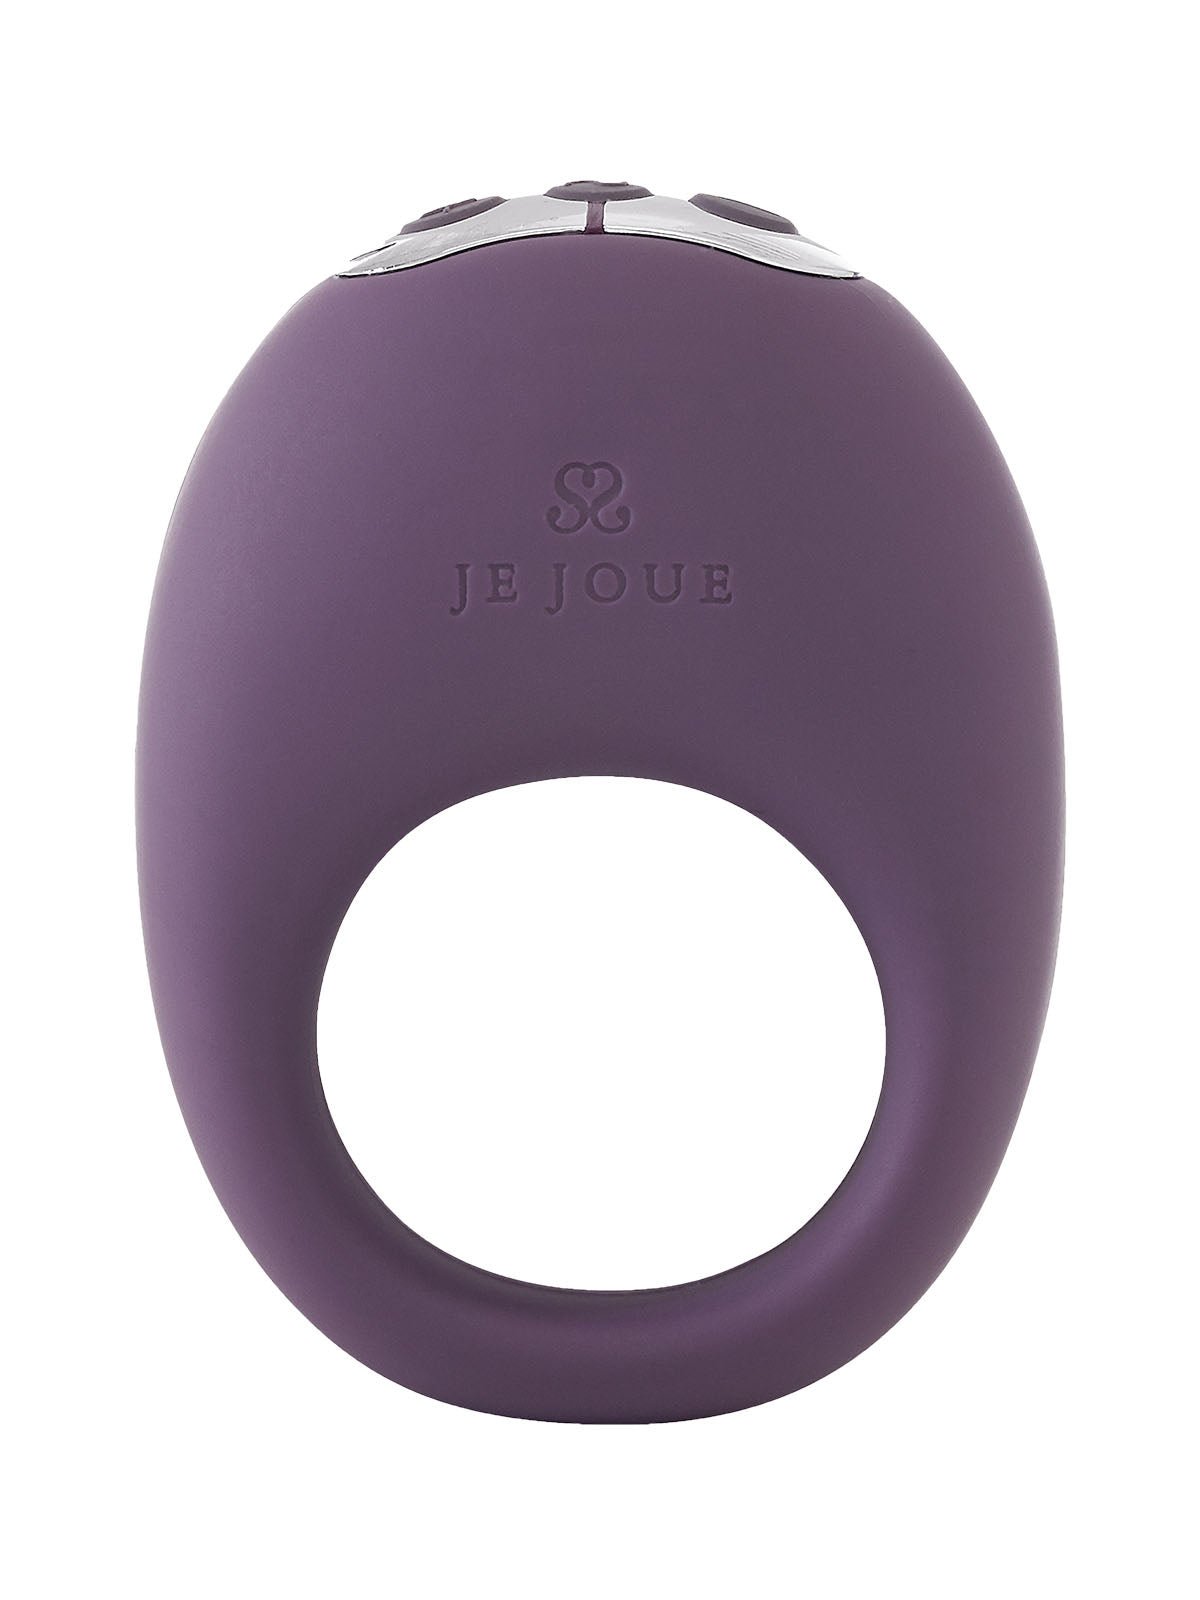 Mio vibrating cock ring by Je Joue